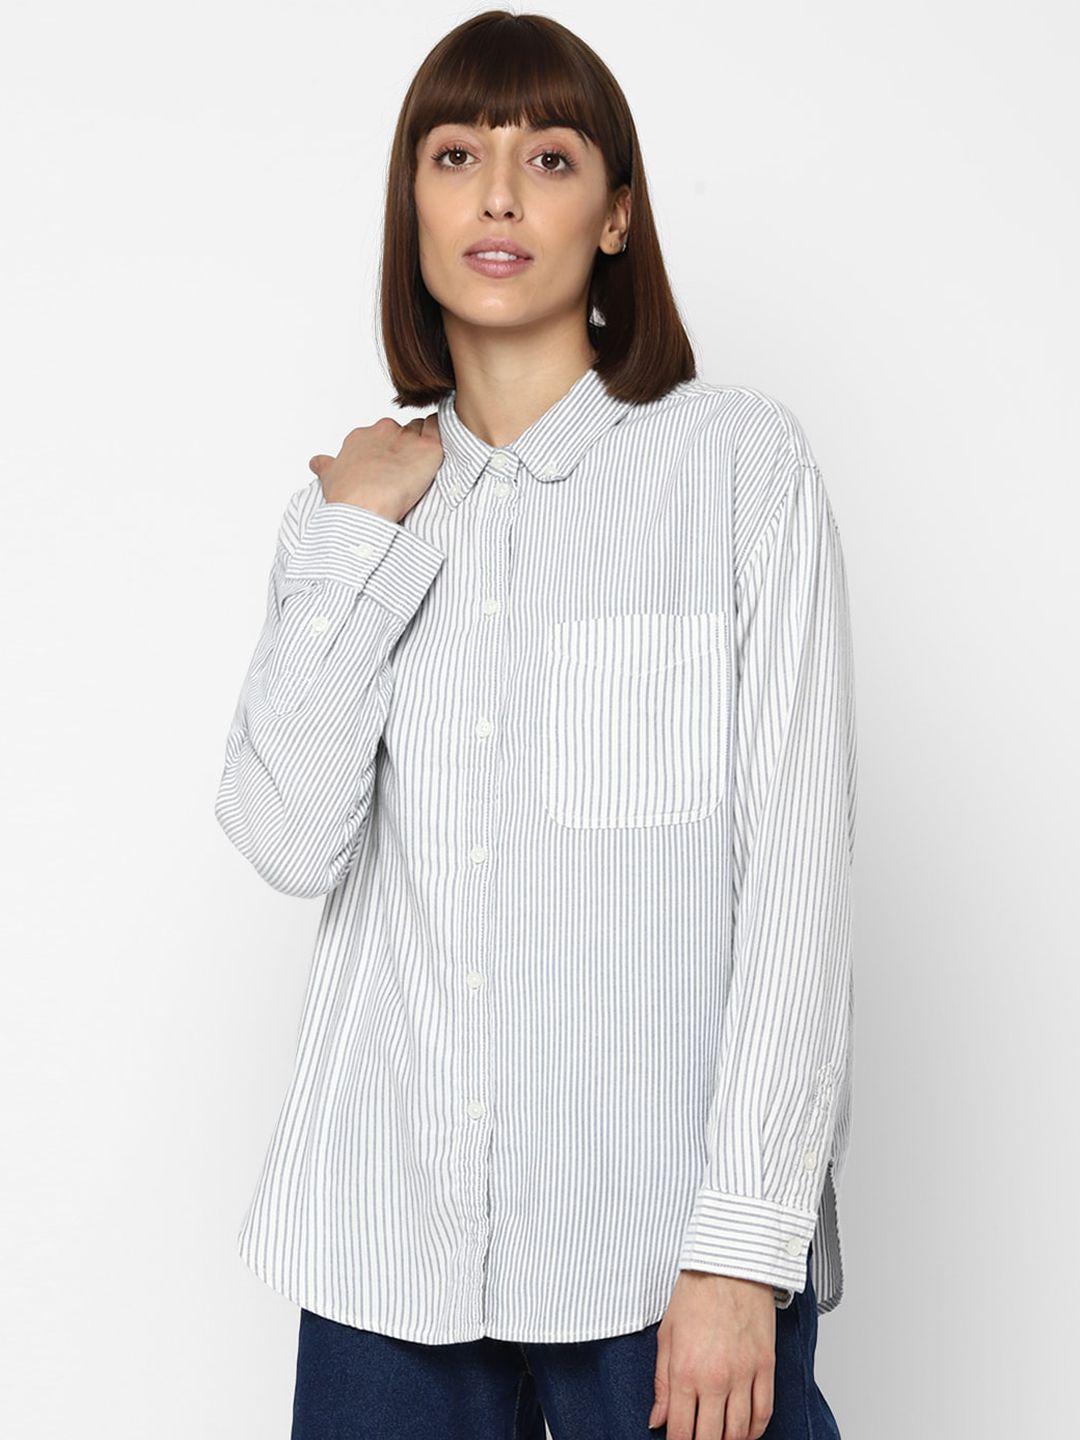 american-eagle-outfitters-women-blue-opaque-striped-casual-shirt